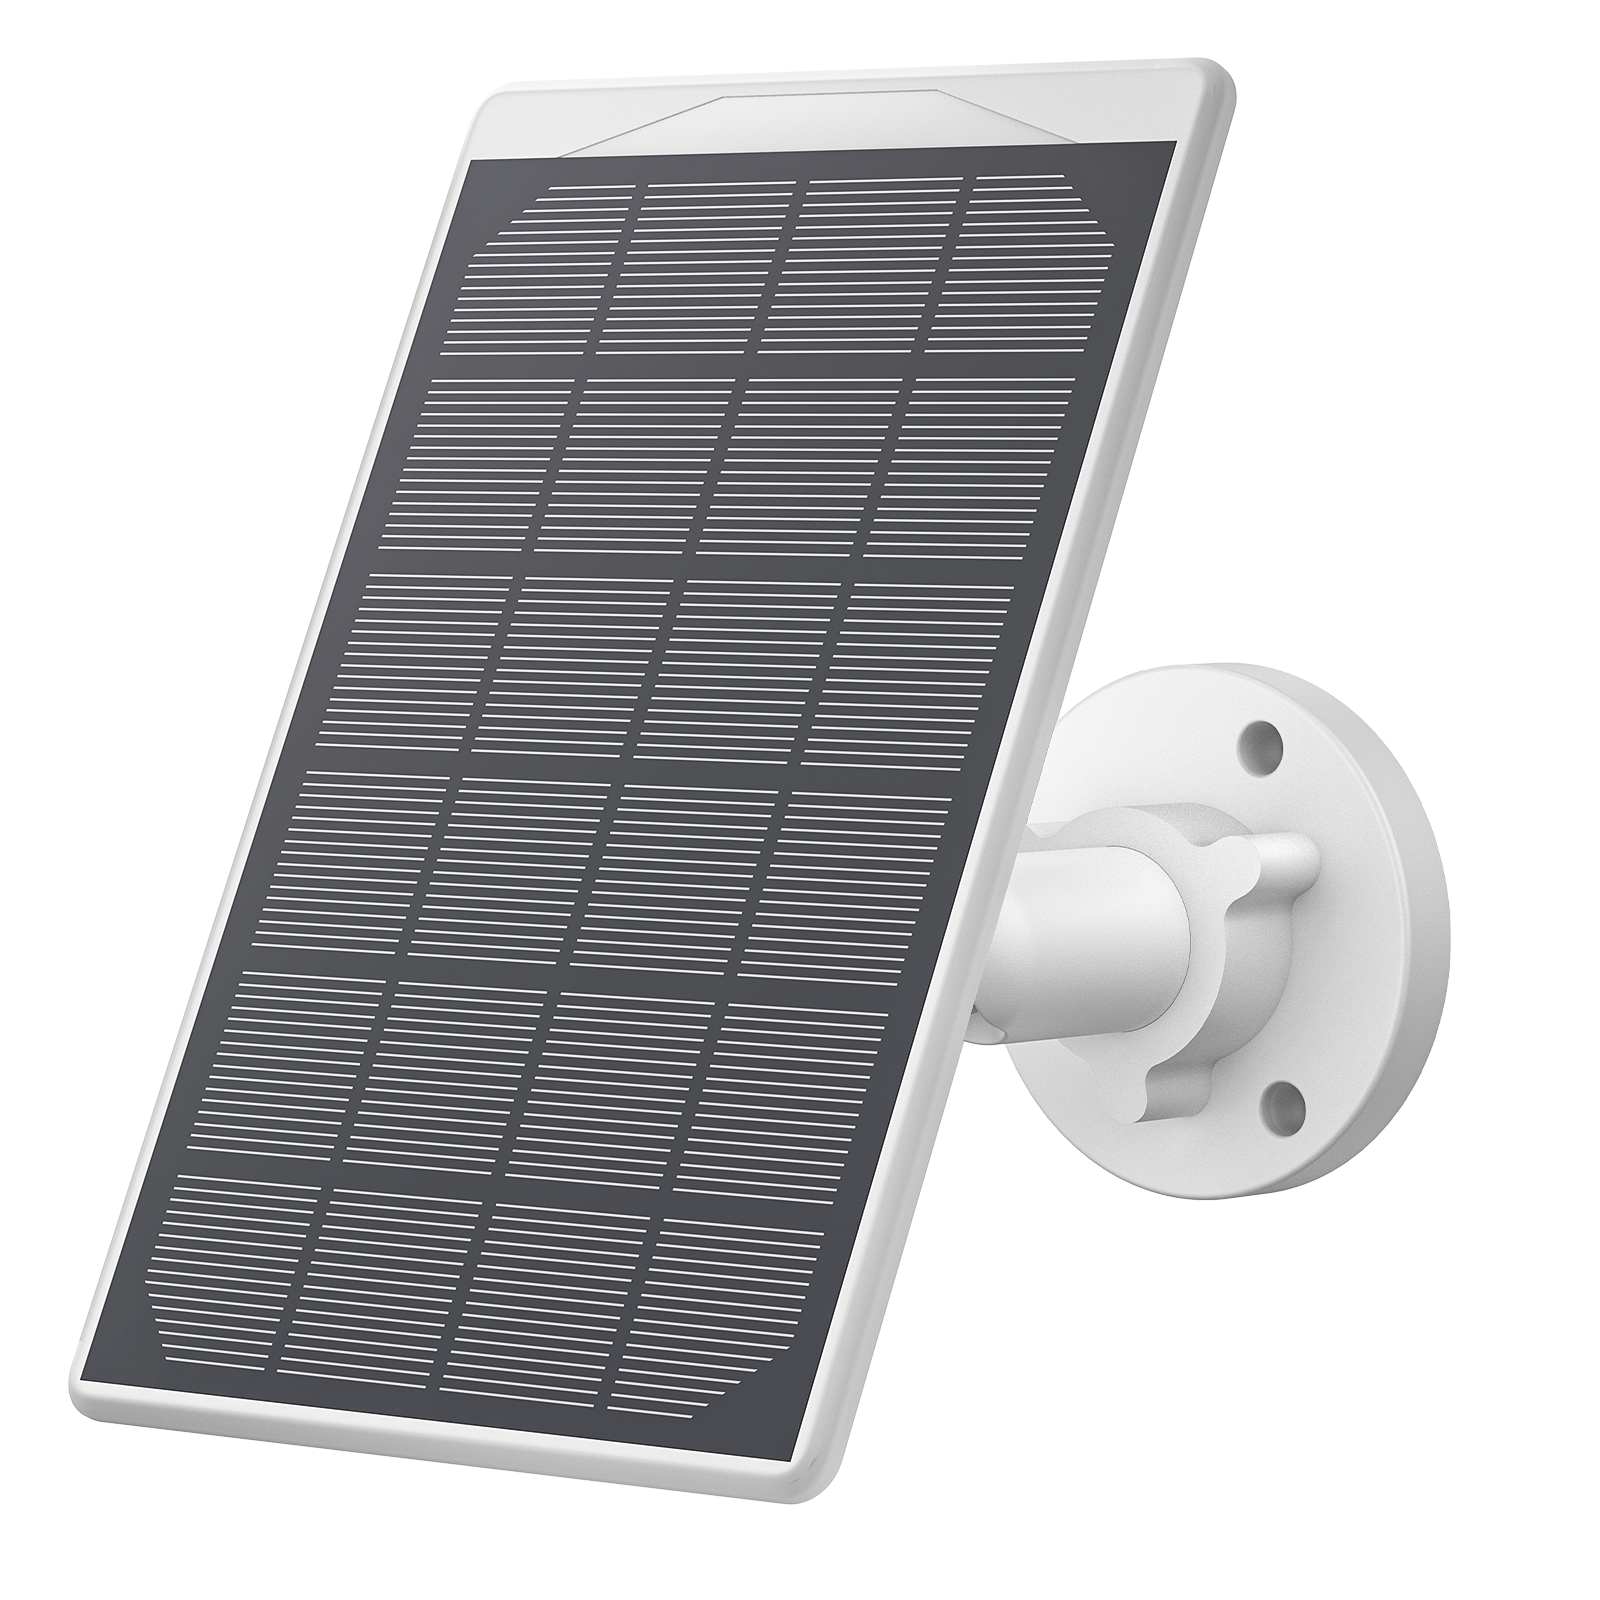 TOGUARD 3W Solar Panel for SC19 Battery Security Camera System - image 1 of 8